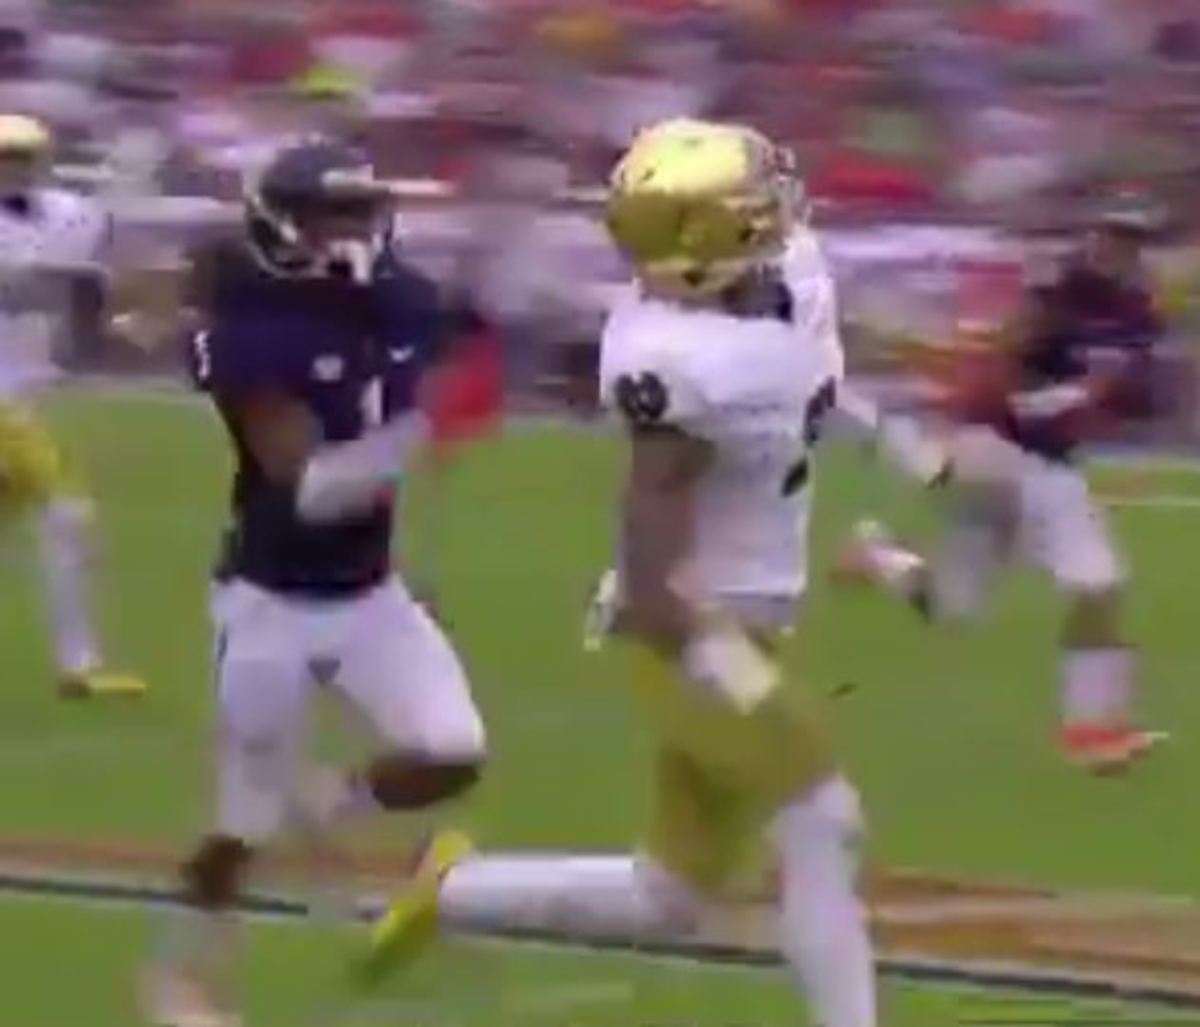 Malik Zaire completes a 59-yard touchdown pass to Will Fuller.